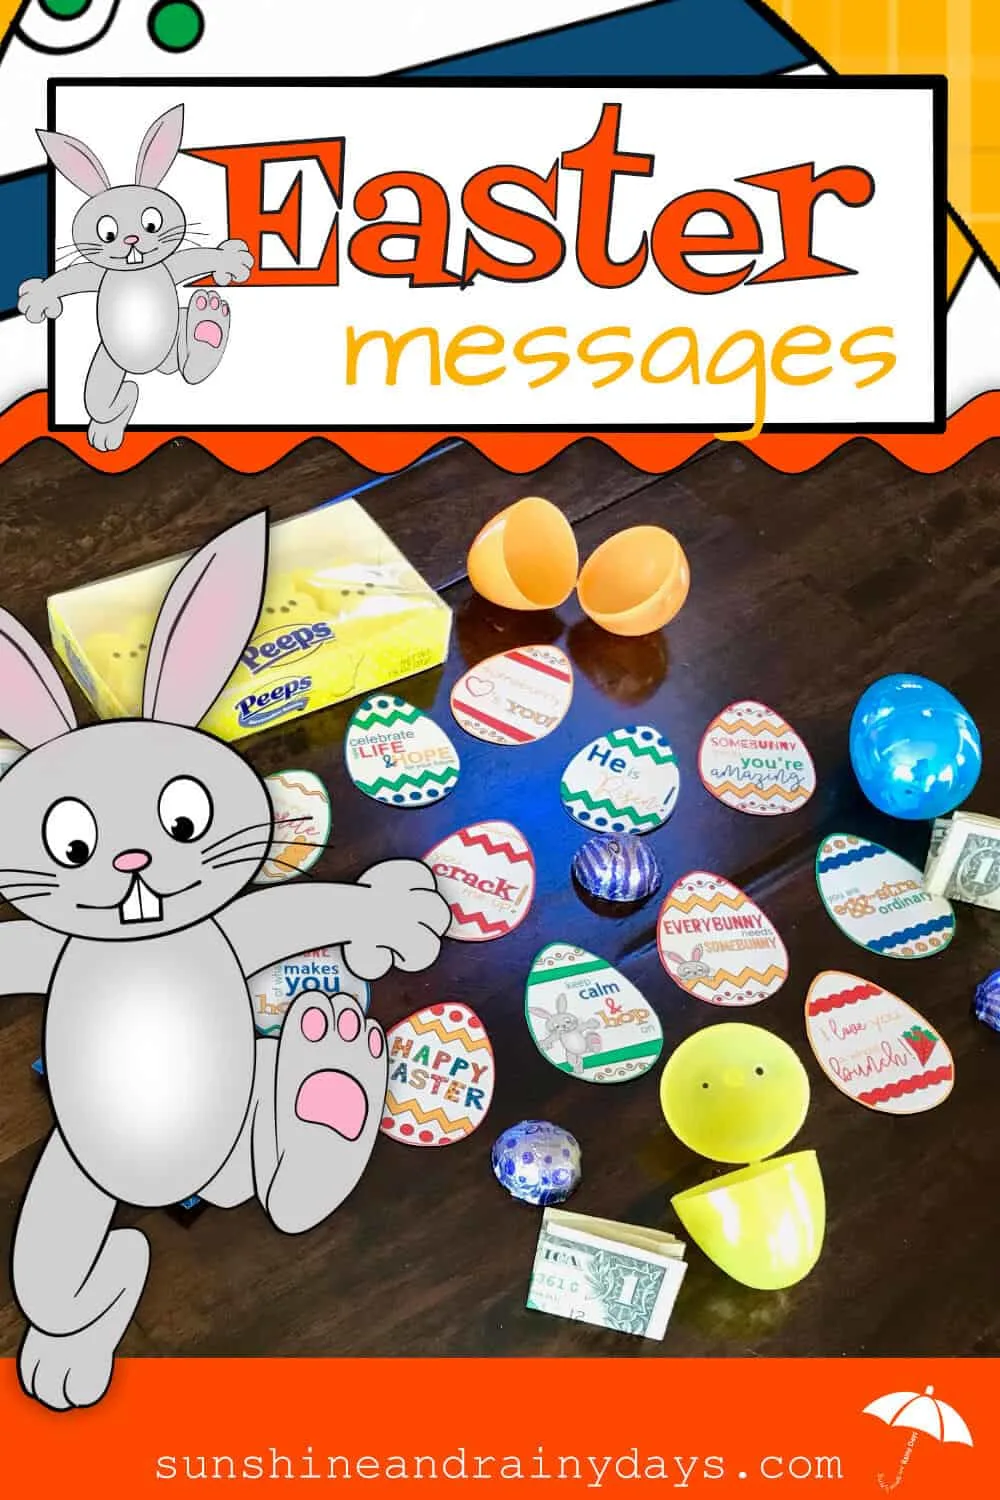 Inspirational And Punny Easter Messages - Sunshine and Rainy Days